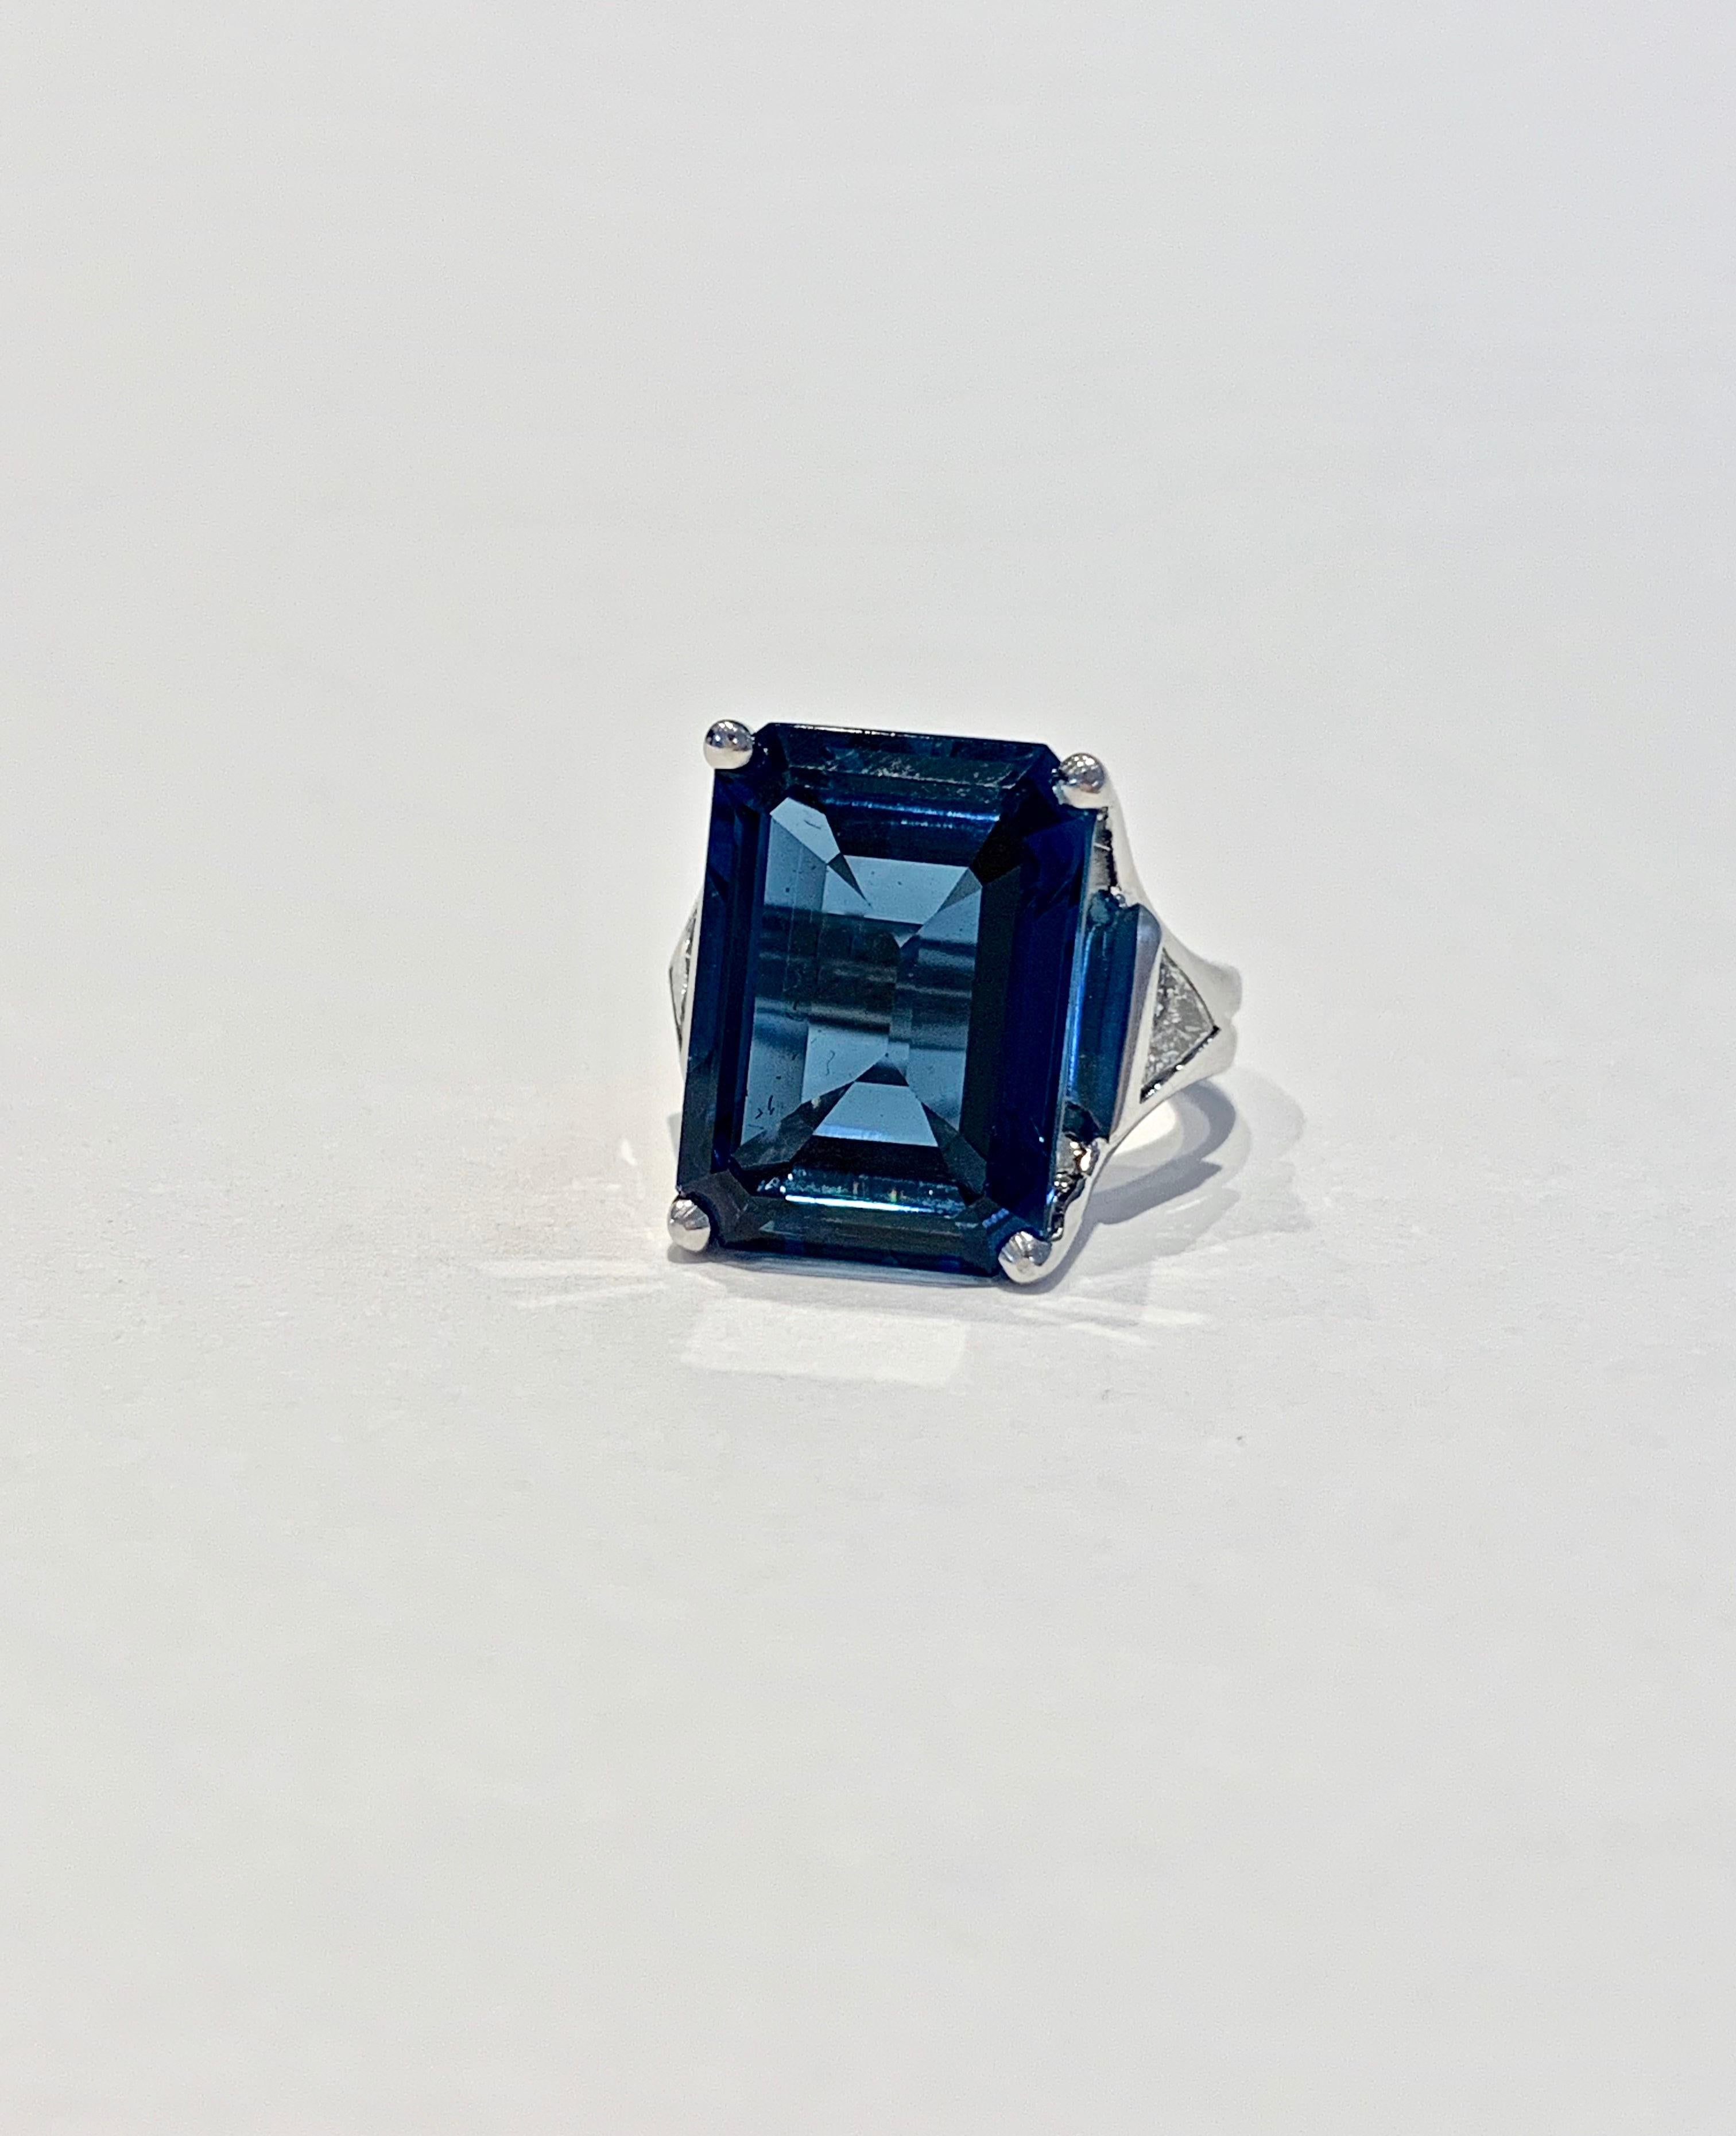 This stunning Bespoke ring is made of up a 7.20ct Octagon Cut Premium London Blue Topaz* which has a beautiful velvety dark blue colour and wonderful clarity.    A CAD was used to get this modern double band design and to show off the Topaz at its